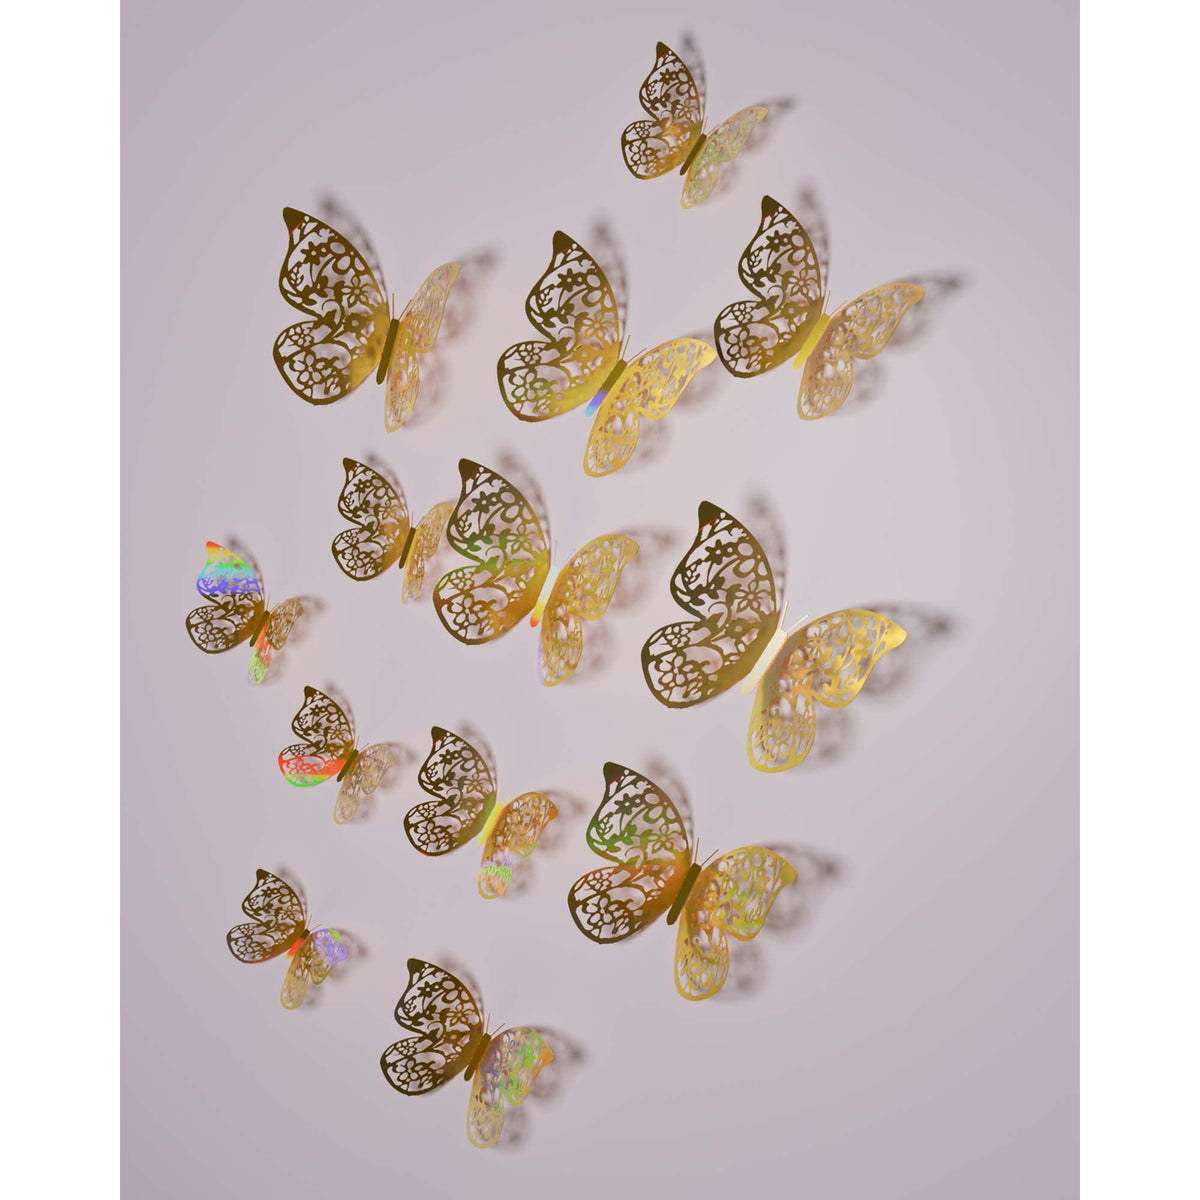 Guangzhou Tomas Crafts Co limited Balloons Gold 3D Butterfly Decorations, 12 Count 810120711157